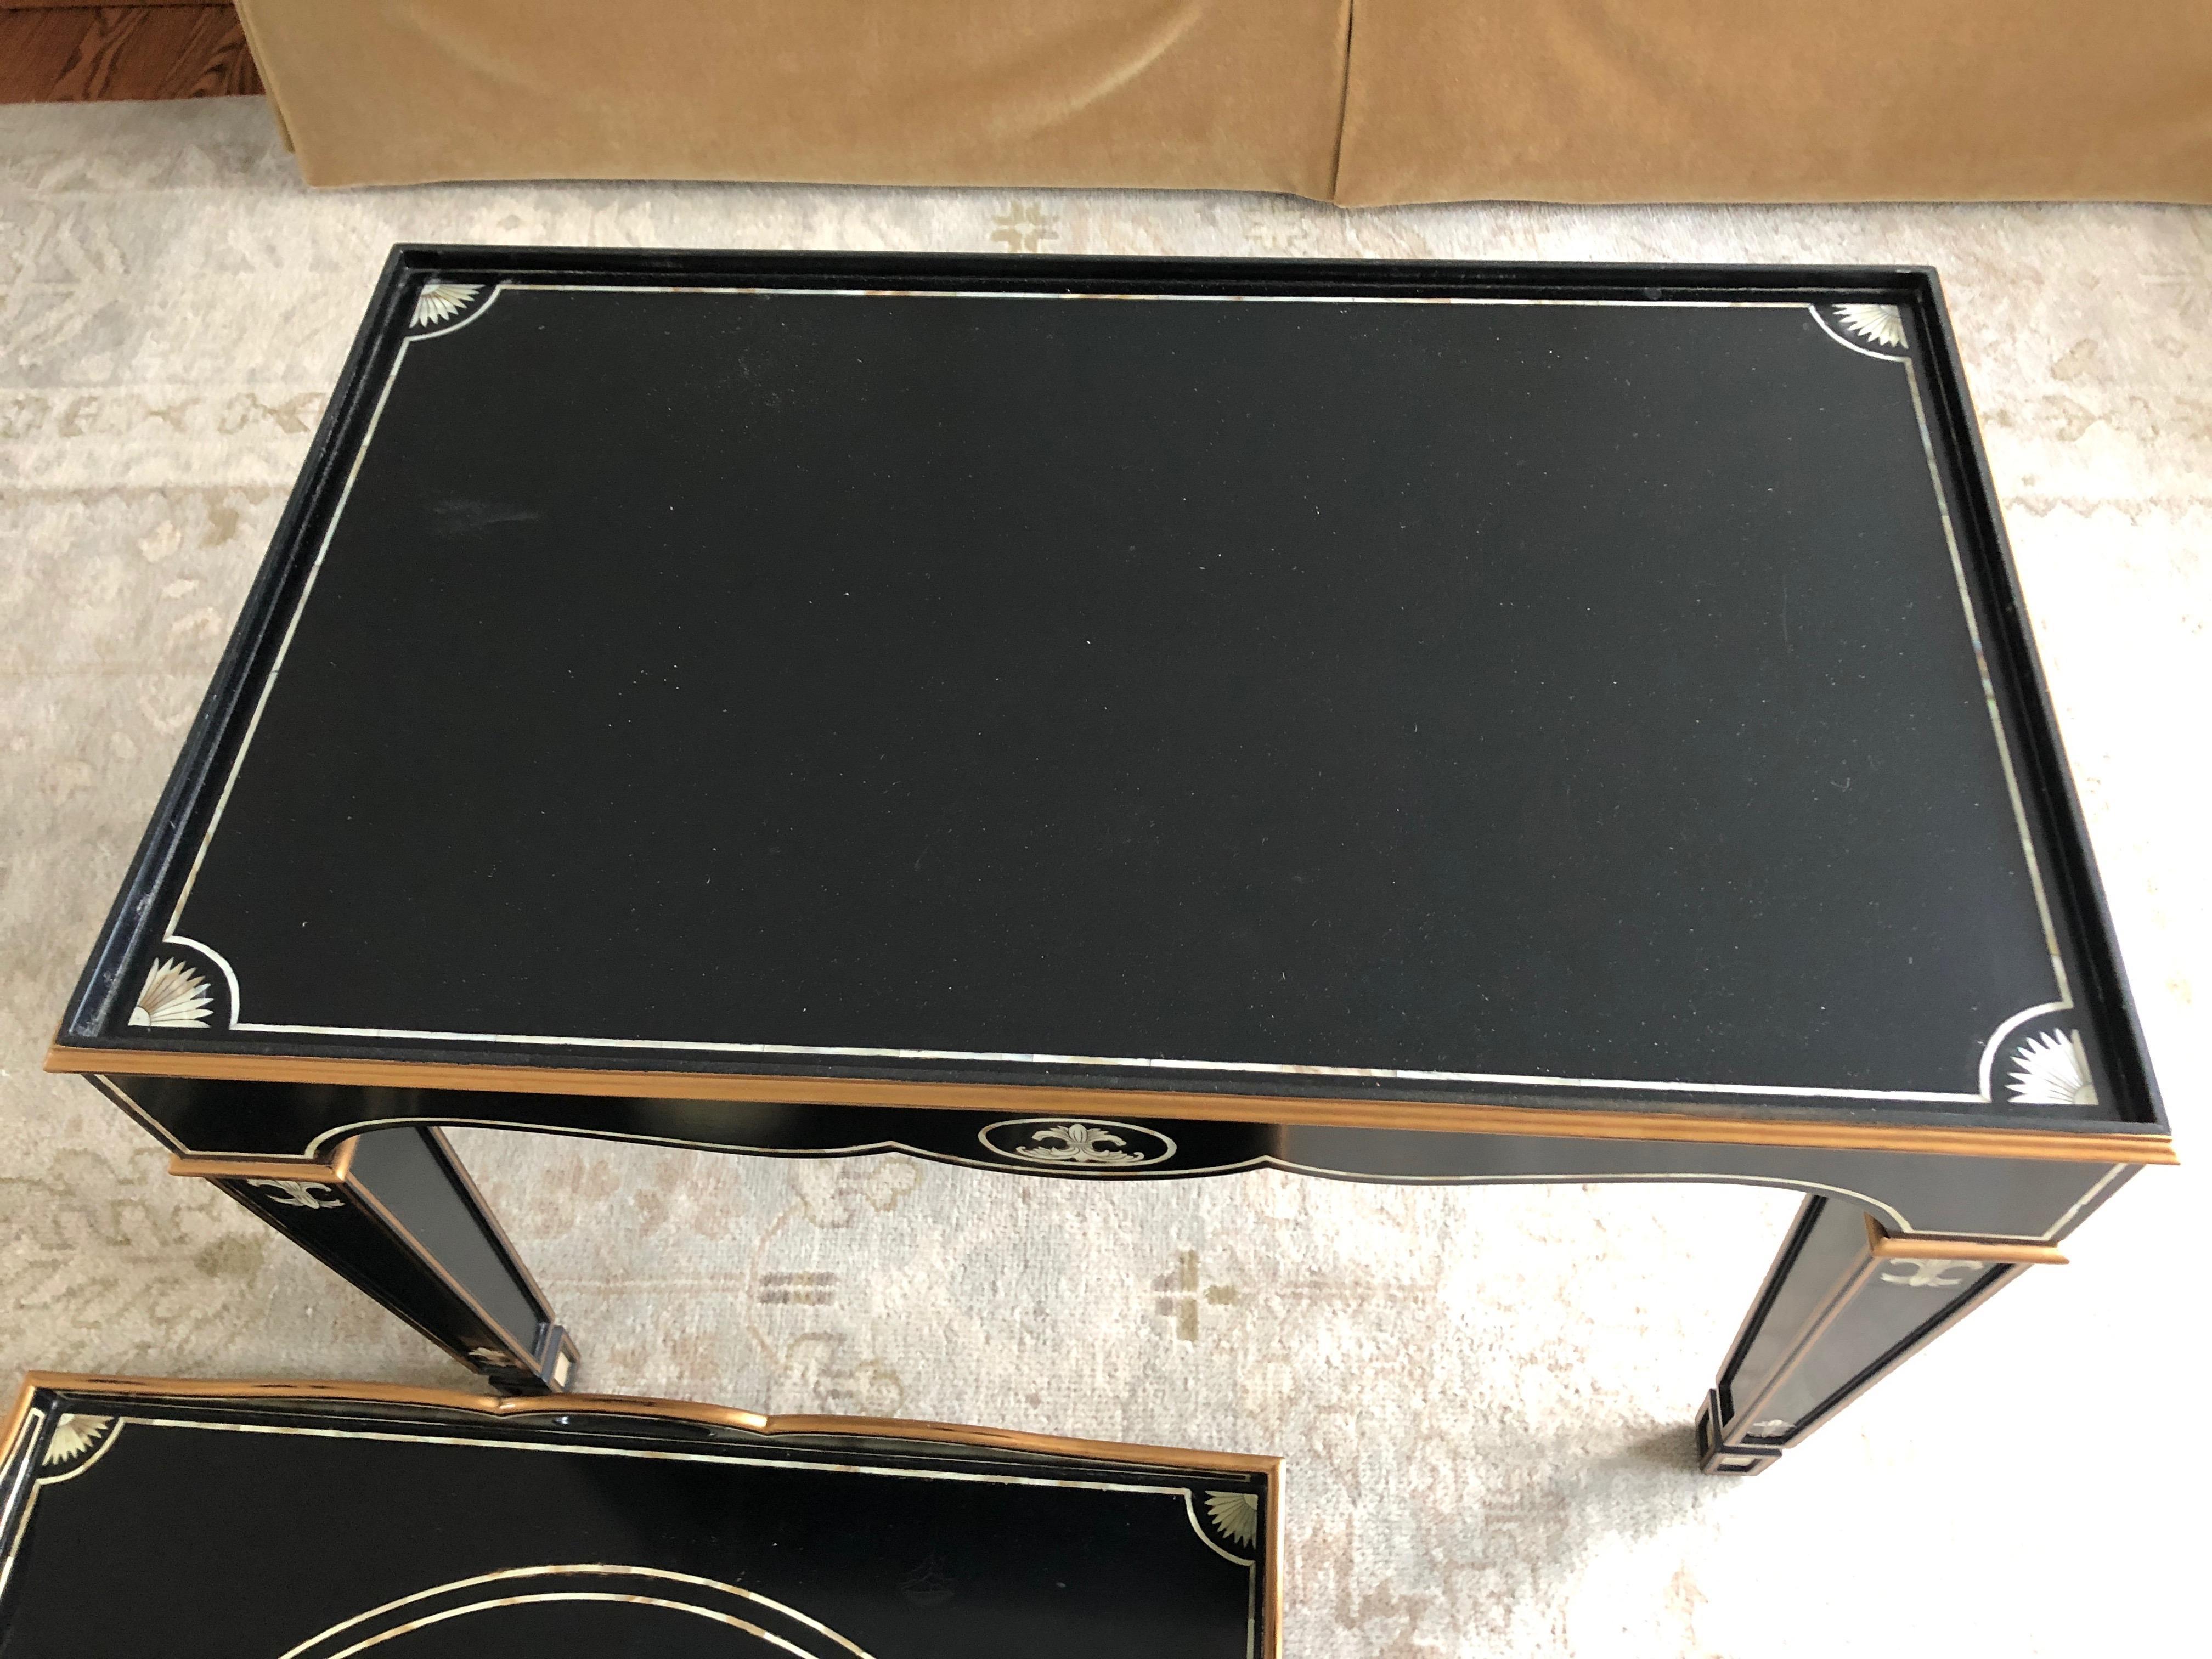 Gem of a Hollywood Regency Black White and Gold Small Sized Tray Coffee Table 8